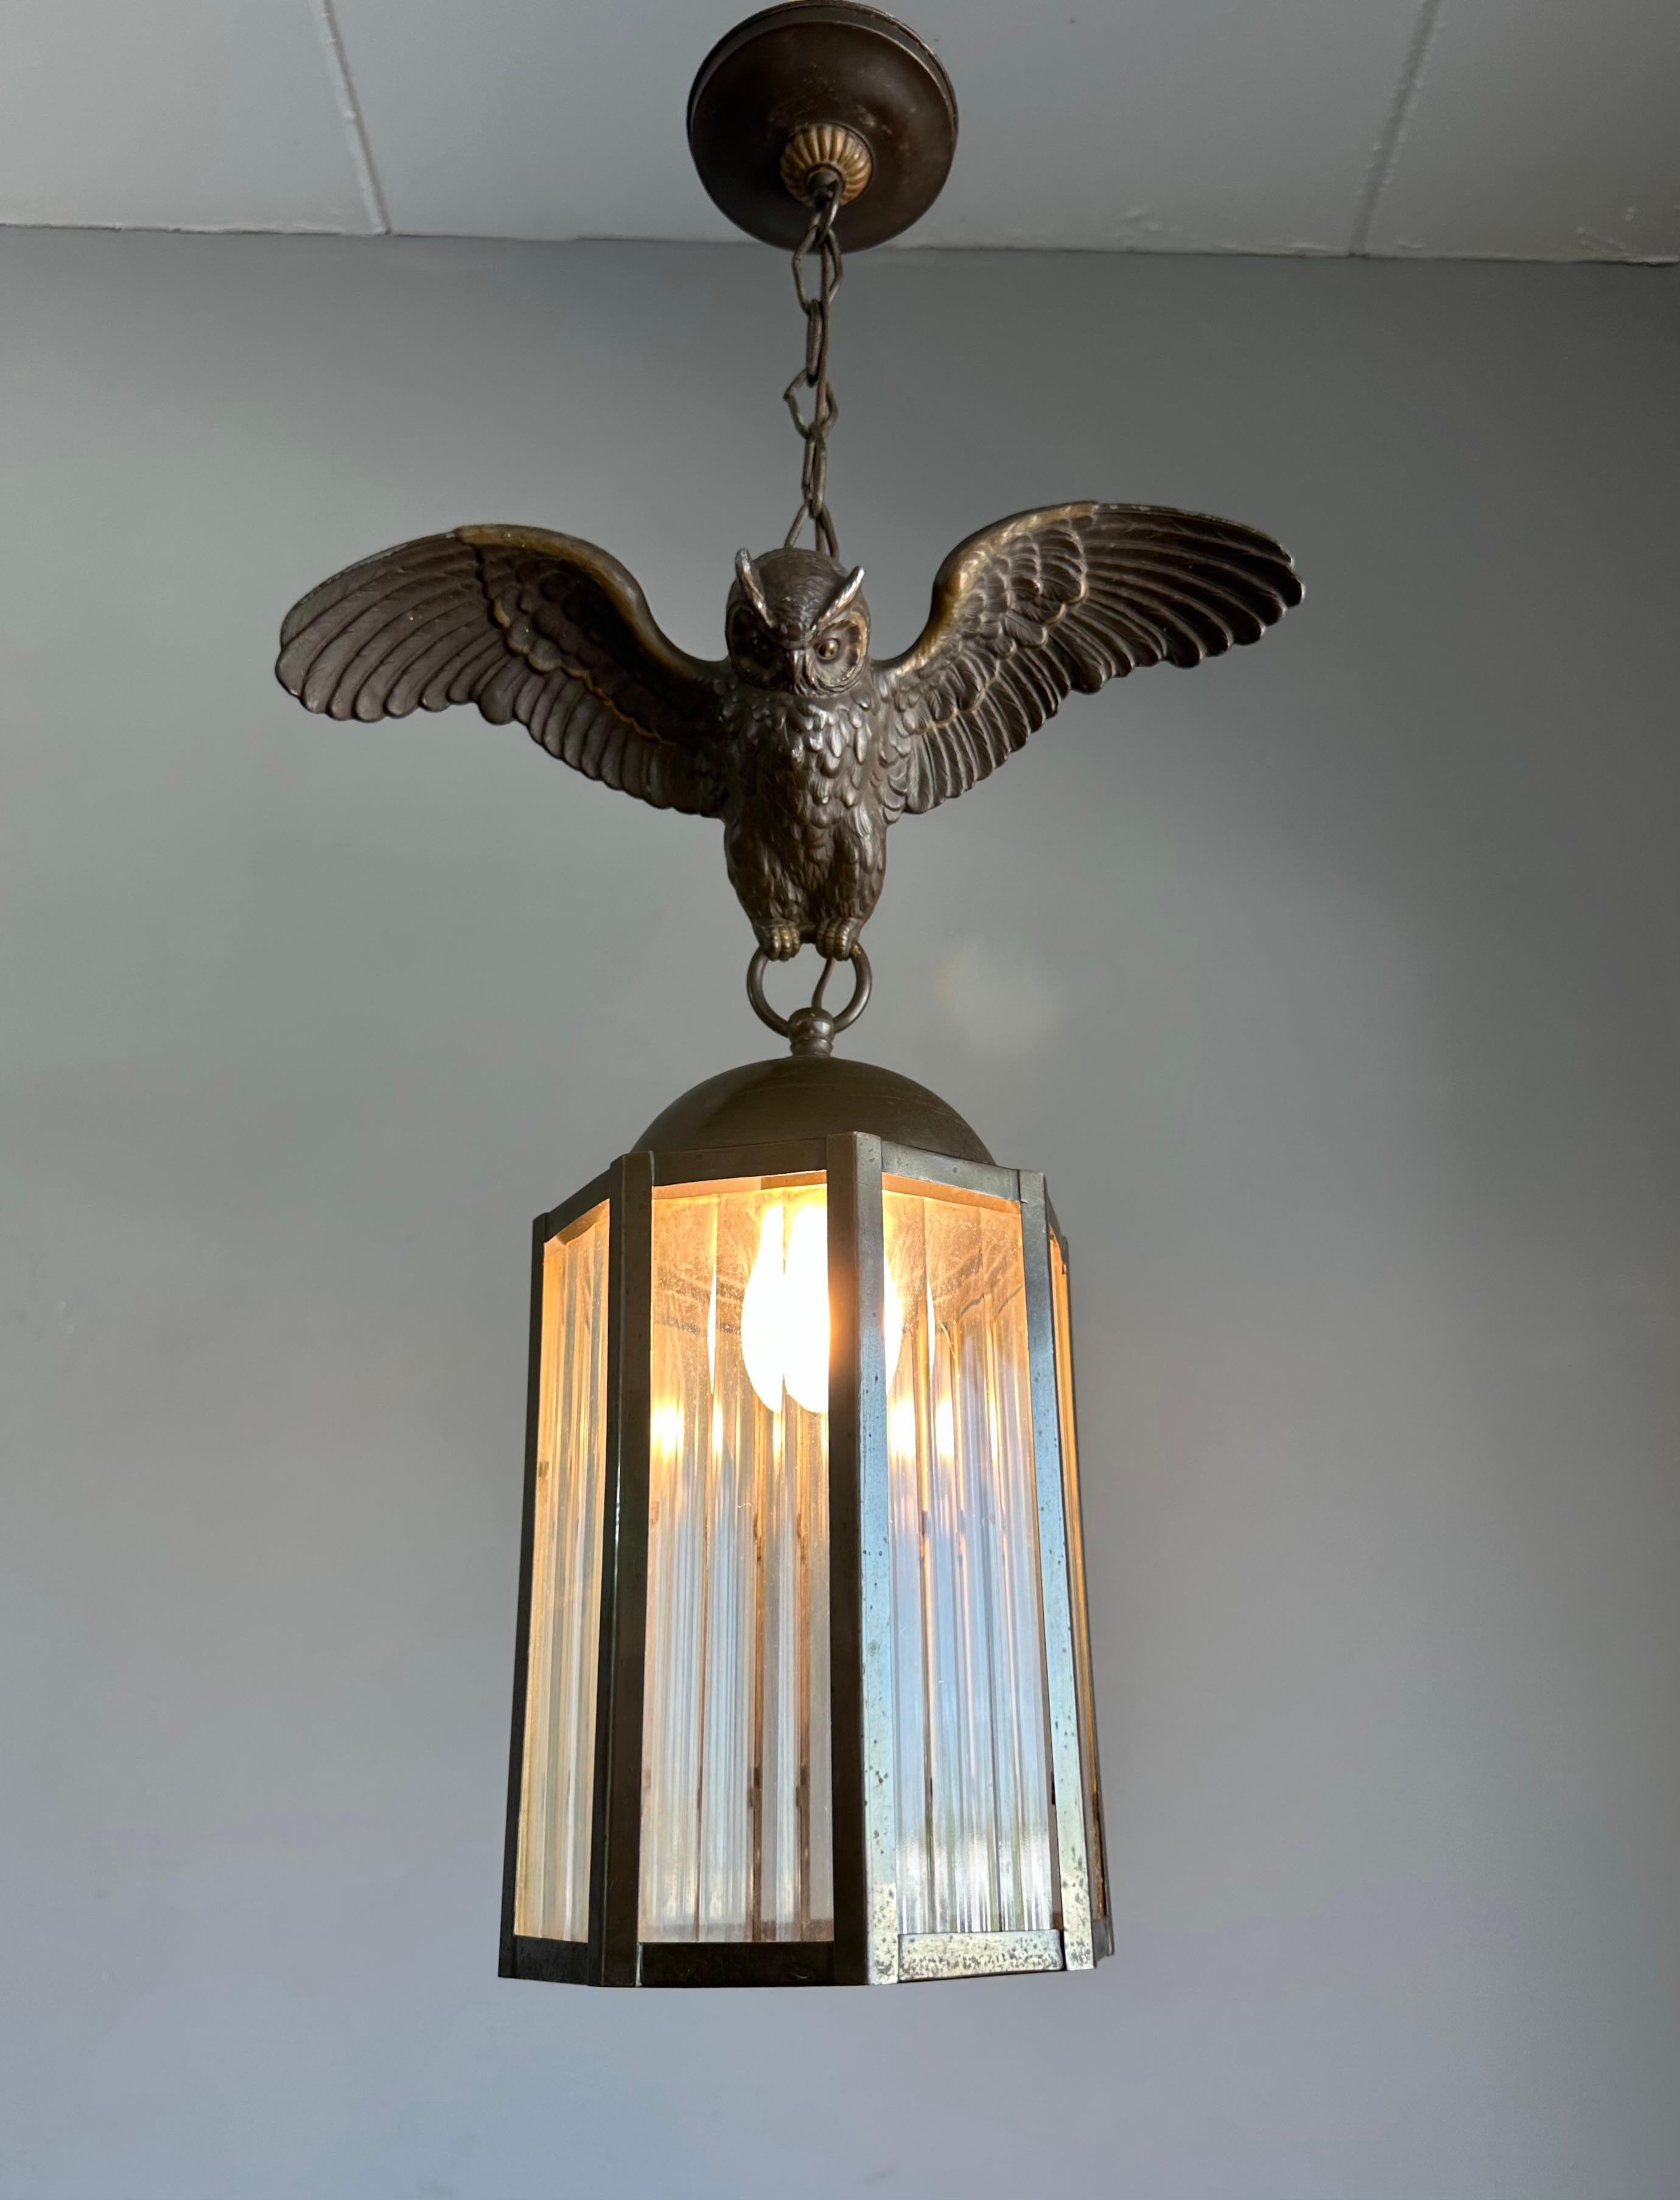 Arts and Crafts Era Flying Owl Sculpture Pendant Light or Lantern with Cut Glass For Sale 4